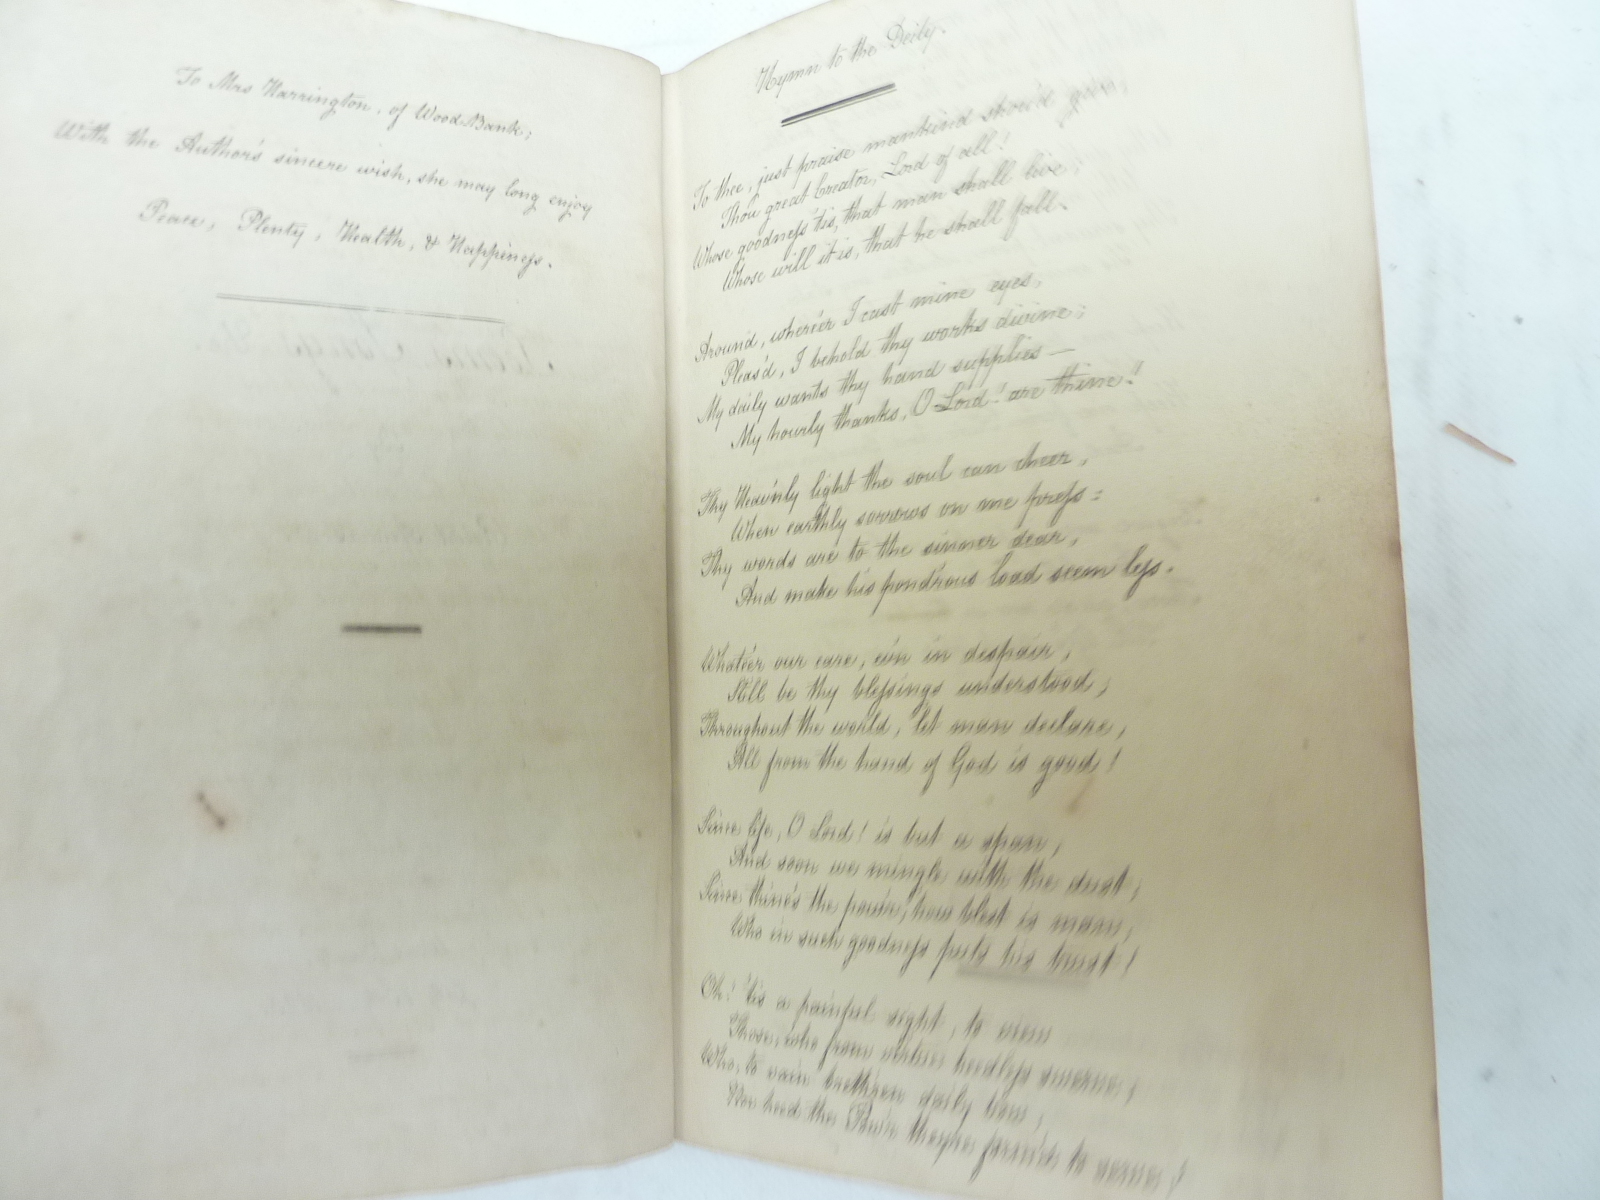 ANDERSON ROBERT. Poems, Songs, Etc. A MANUSCRIPT VOLUME IN THE POET'S OWN HAND. 21pp. - Image 3 of 4